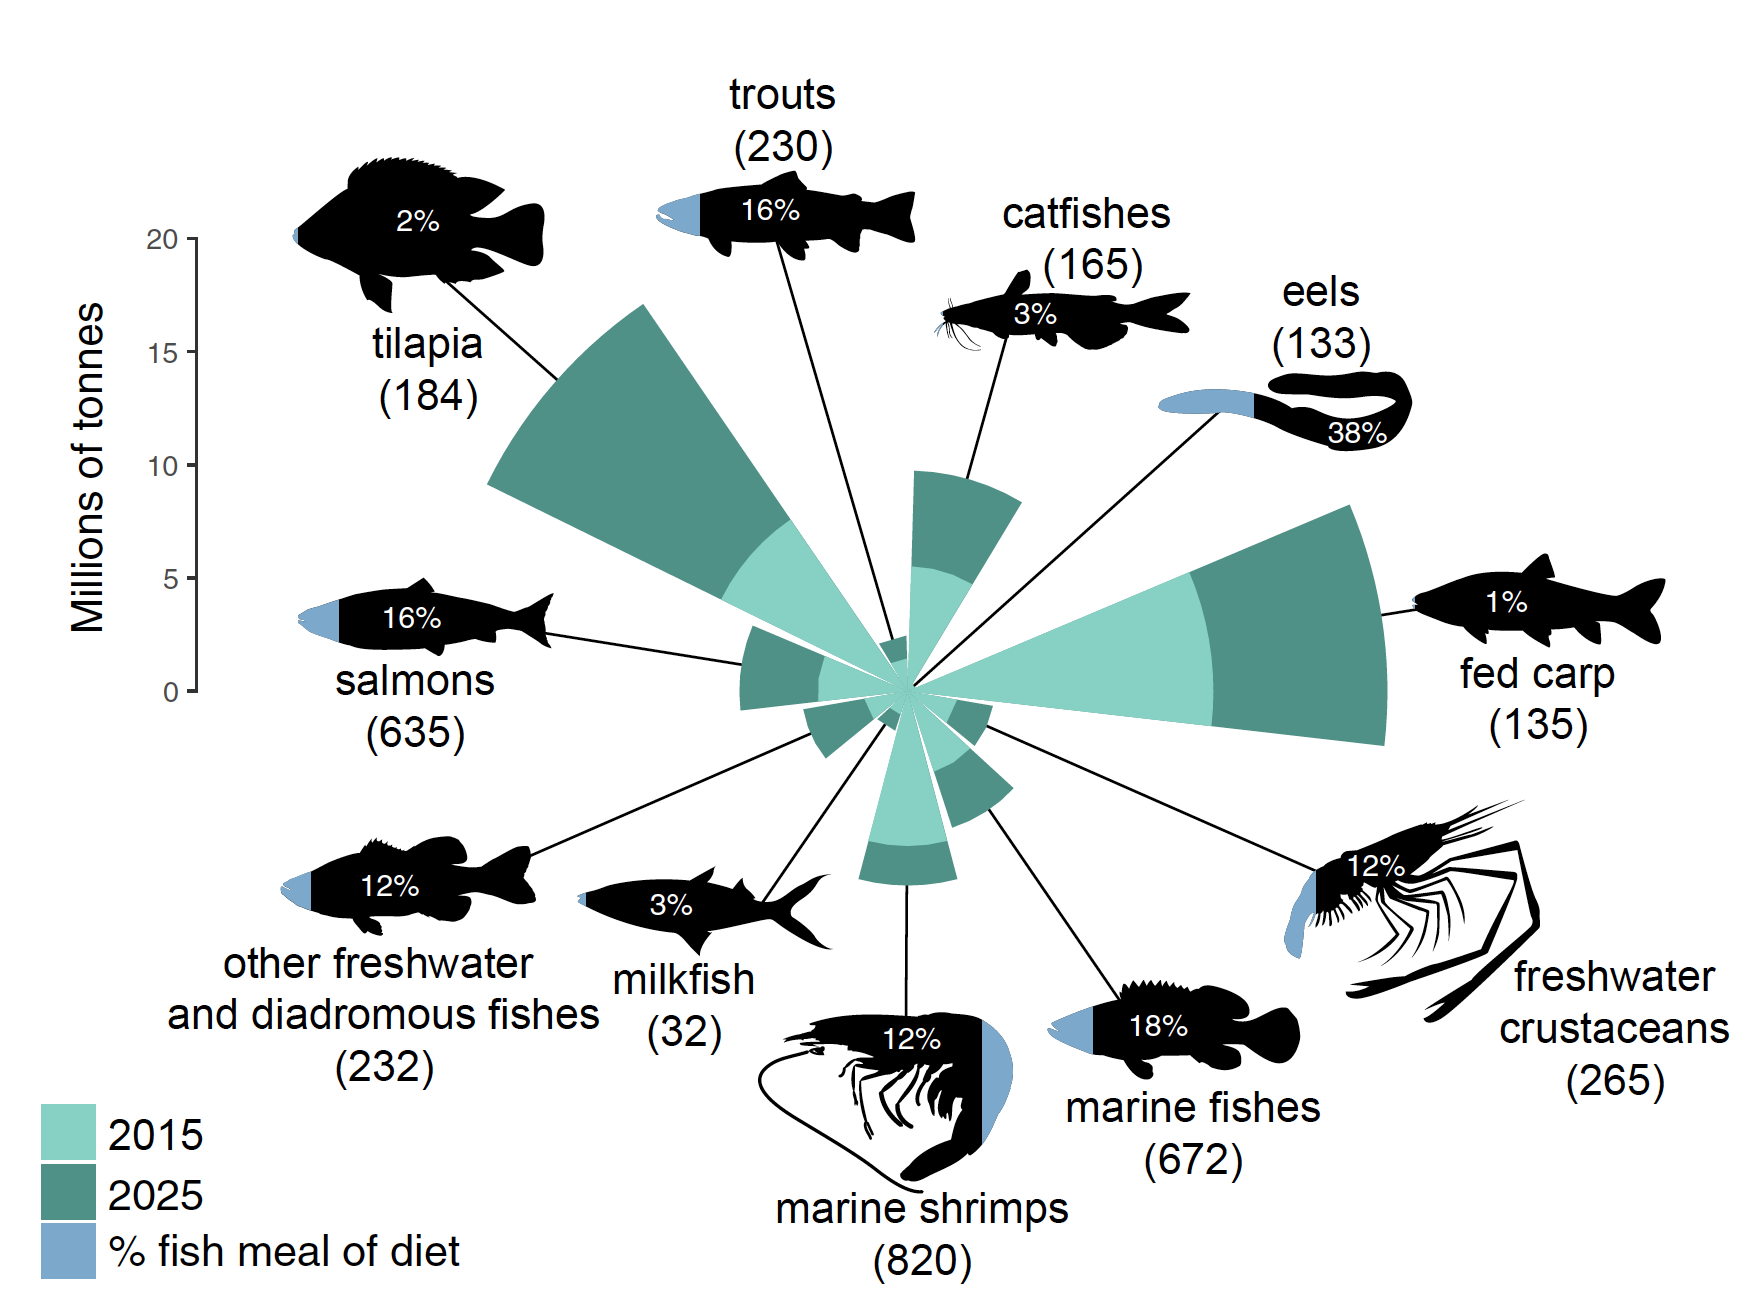 https://projects.luke.fi/aquaimpact/wp-content/uploads/sites/37/2019/12/fig1-evolution-of-fish-feed.png